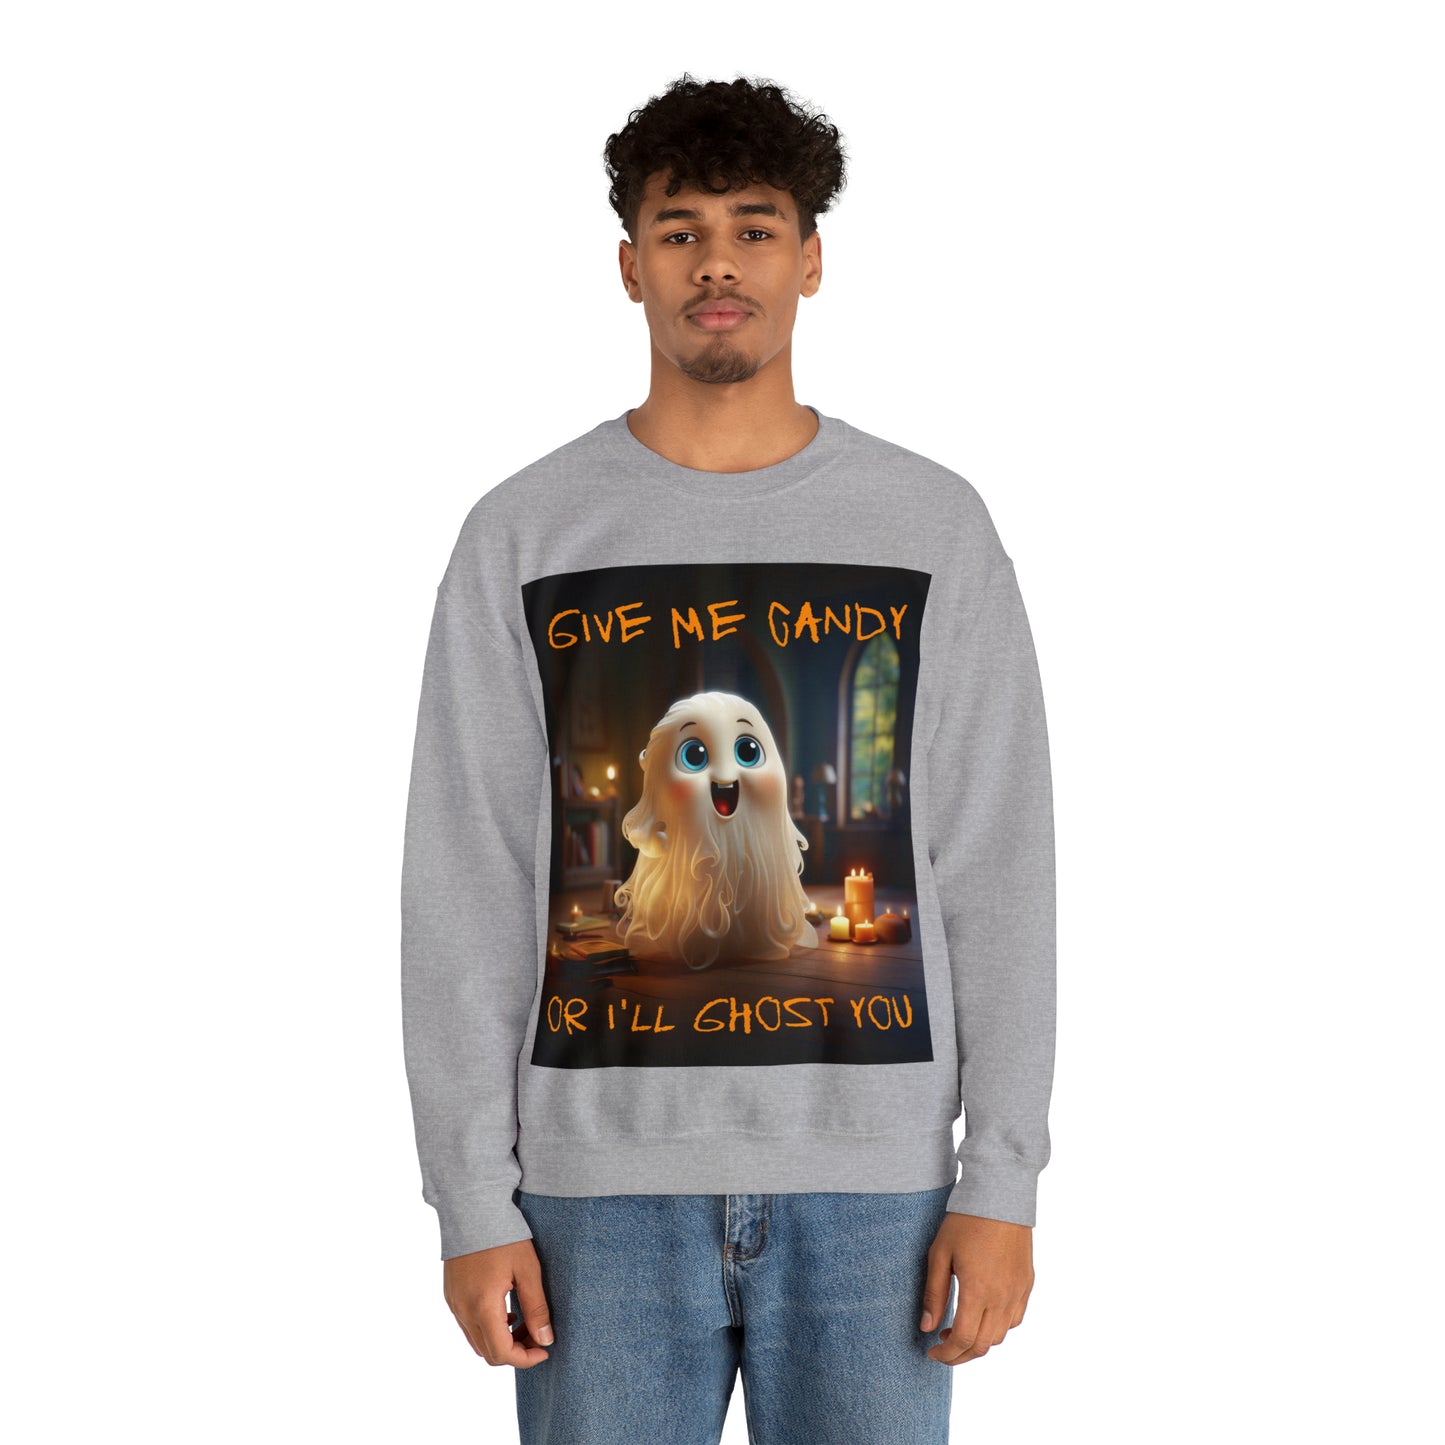 Give Me Candy Or I'll Ghost You Halloween Ghost Sweatshirt Men's Women's Black Grey White Small Medium Large XL XXL XXL Halloween Sweatshirt